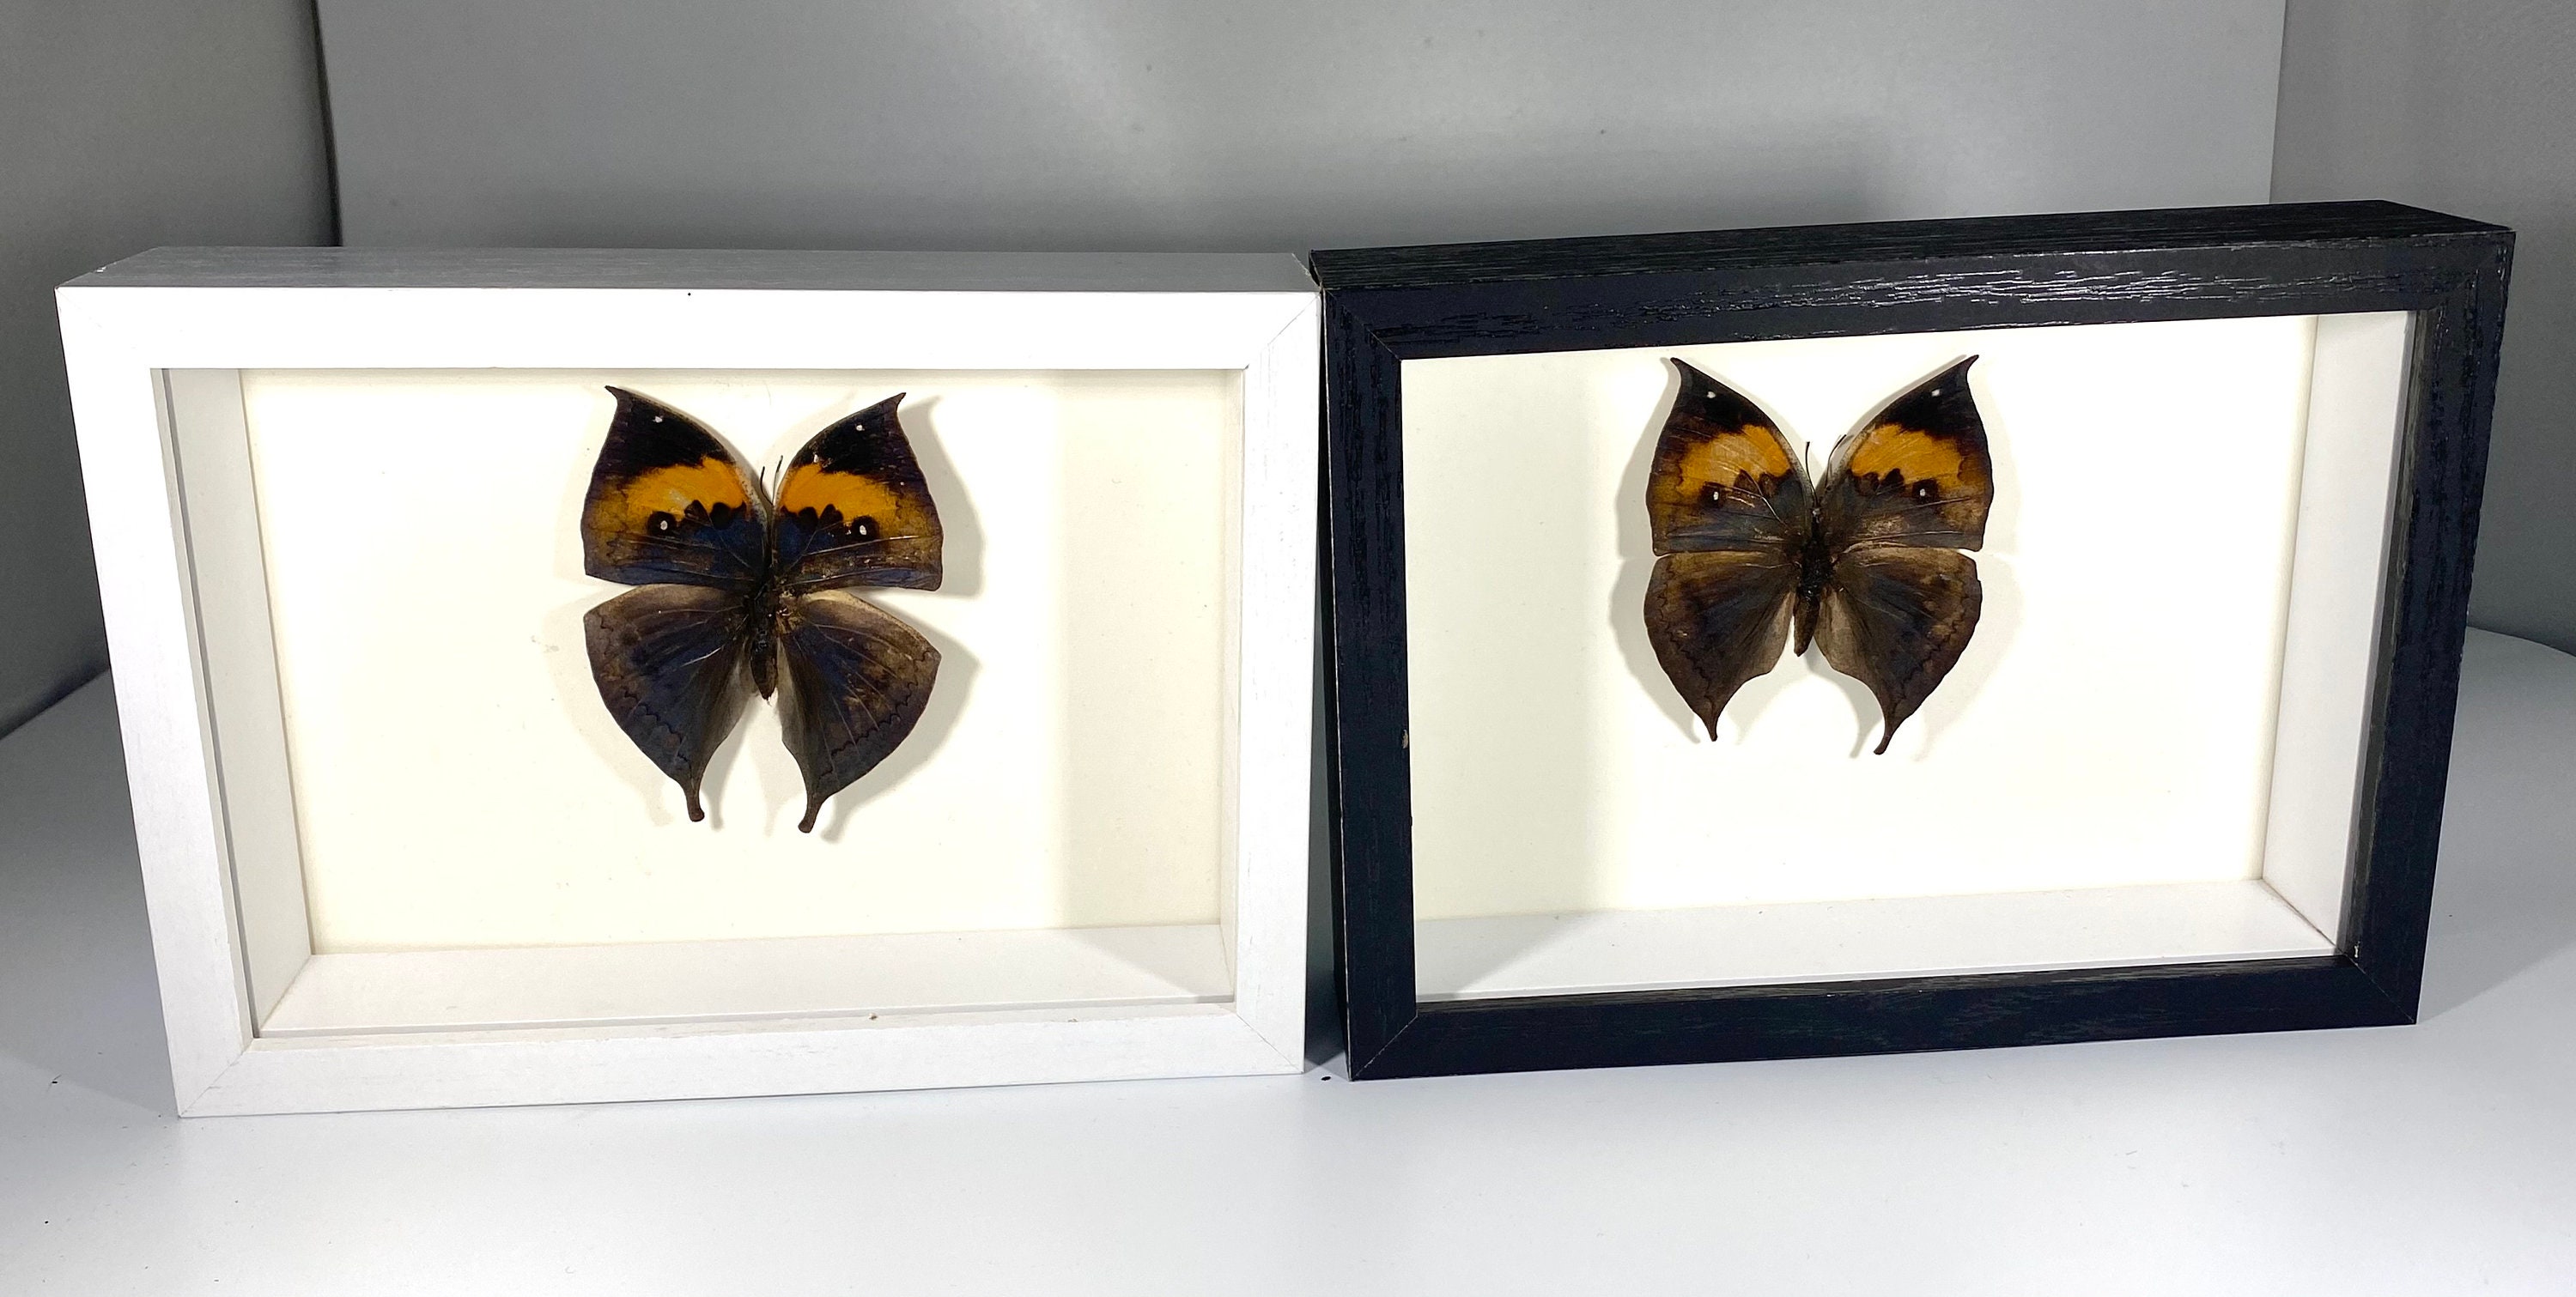 Real Framed Black White Shadow Box Indian Orange Oakleaf Butterfly Kallima inachus insect taxidermyHome Decor